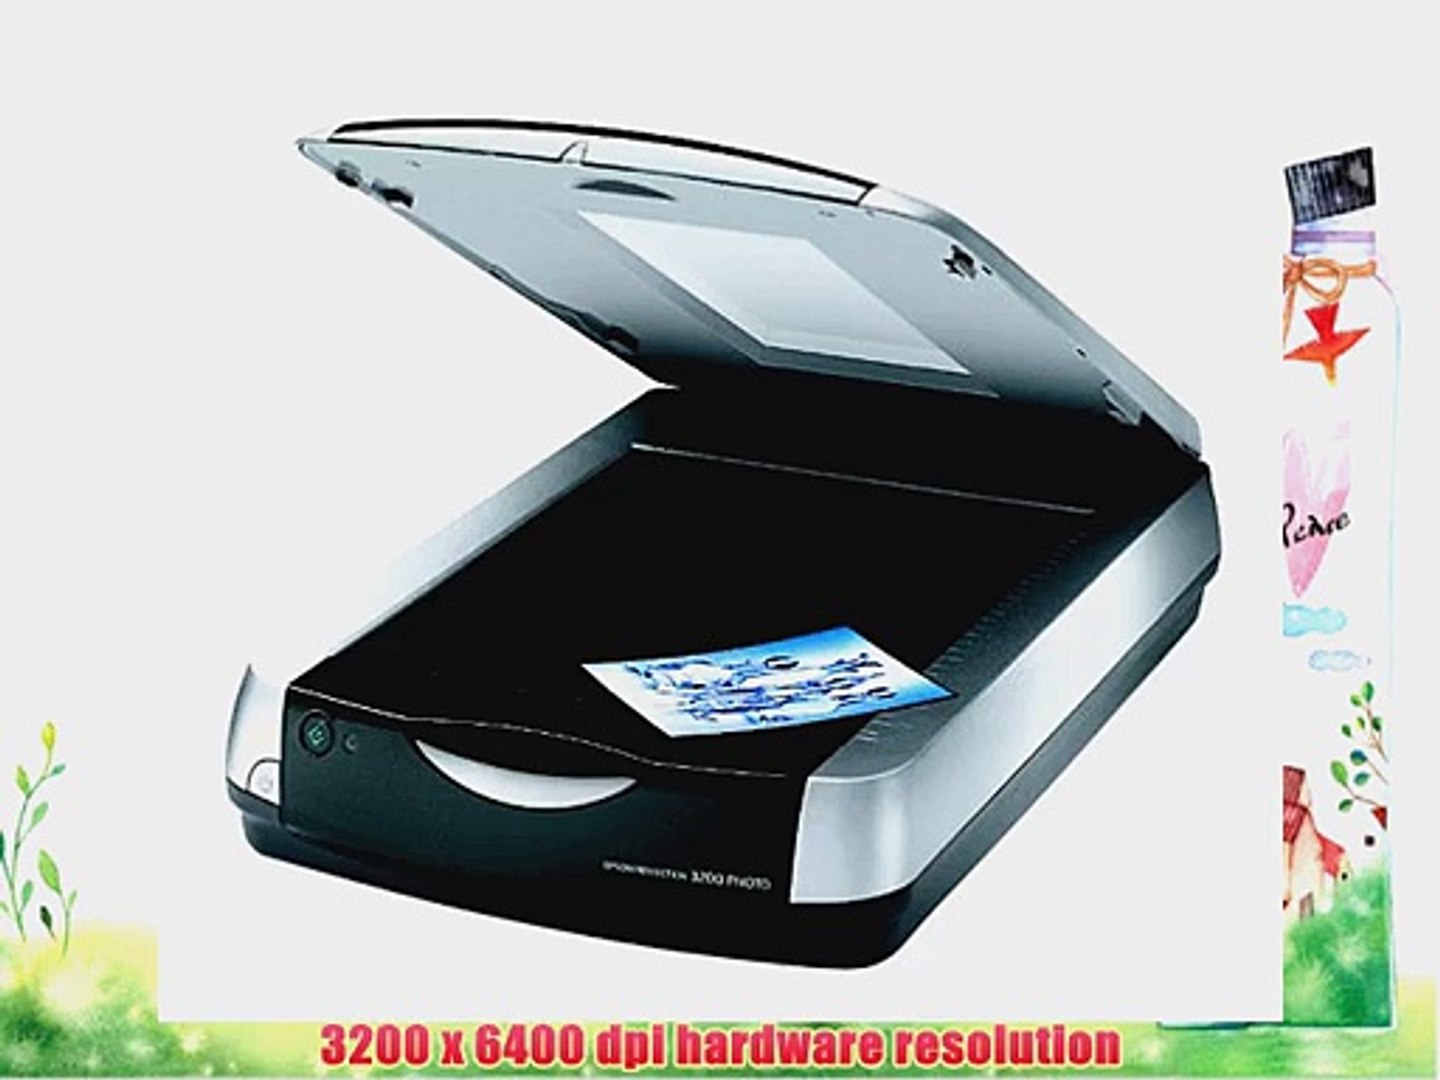 Epson Perfection 3200 Photo Flatbed Scanner - video Dailymotion